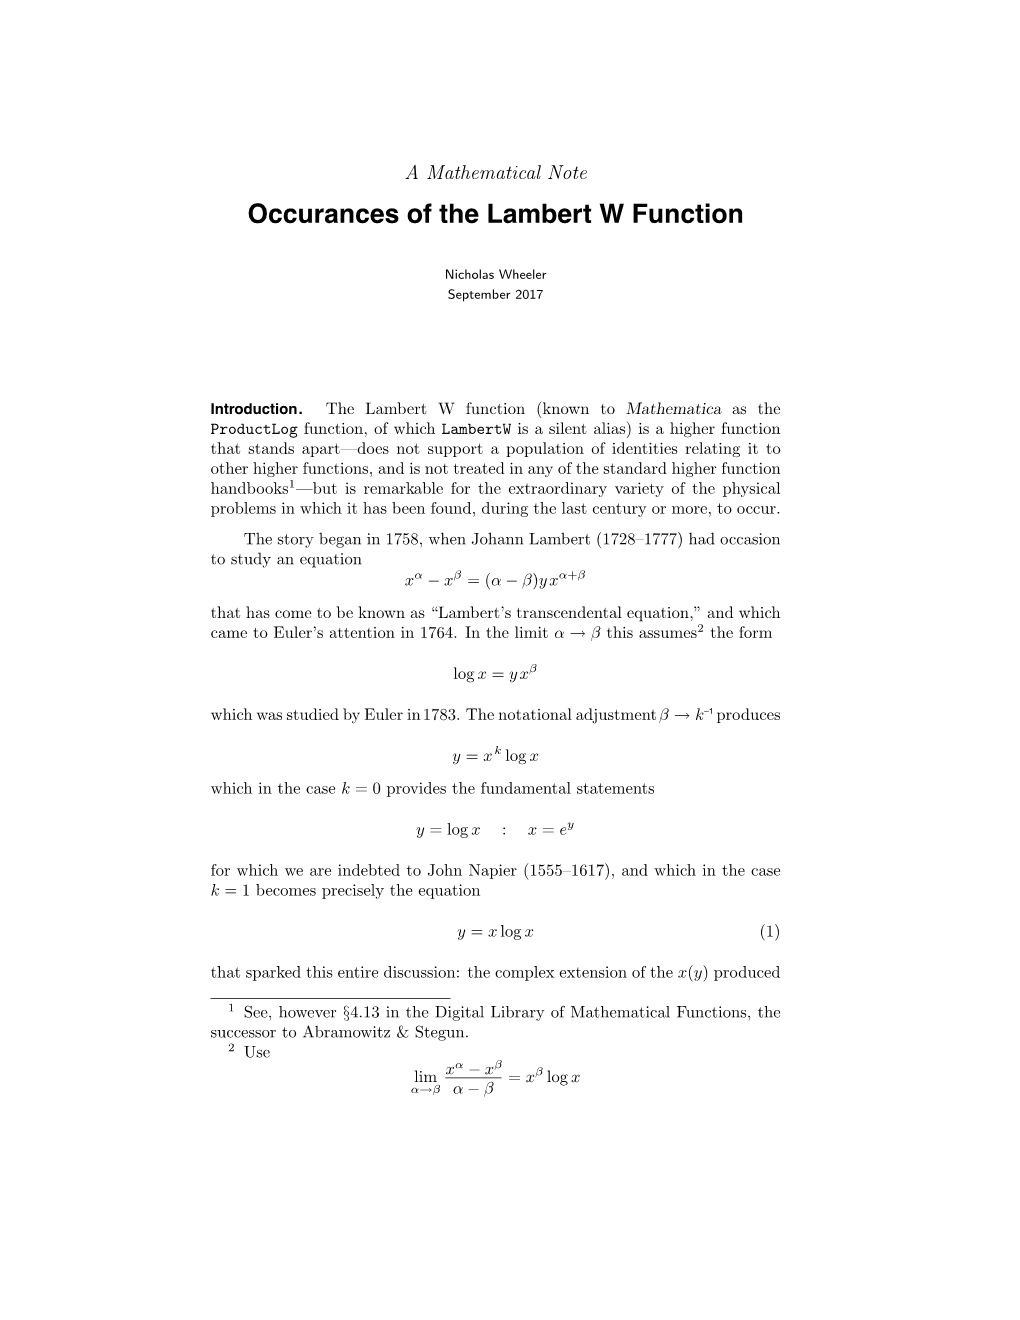 Occurances of the Lambert W Function